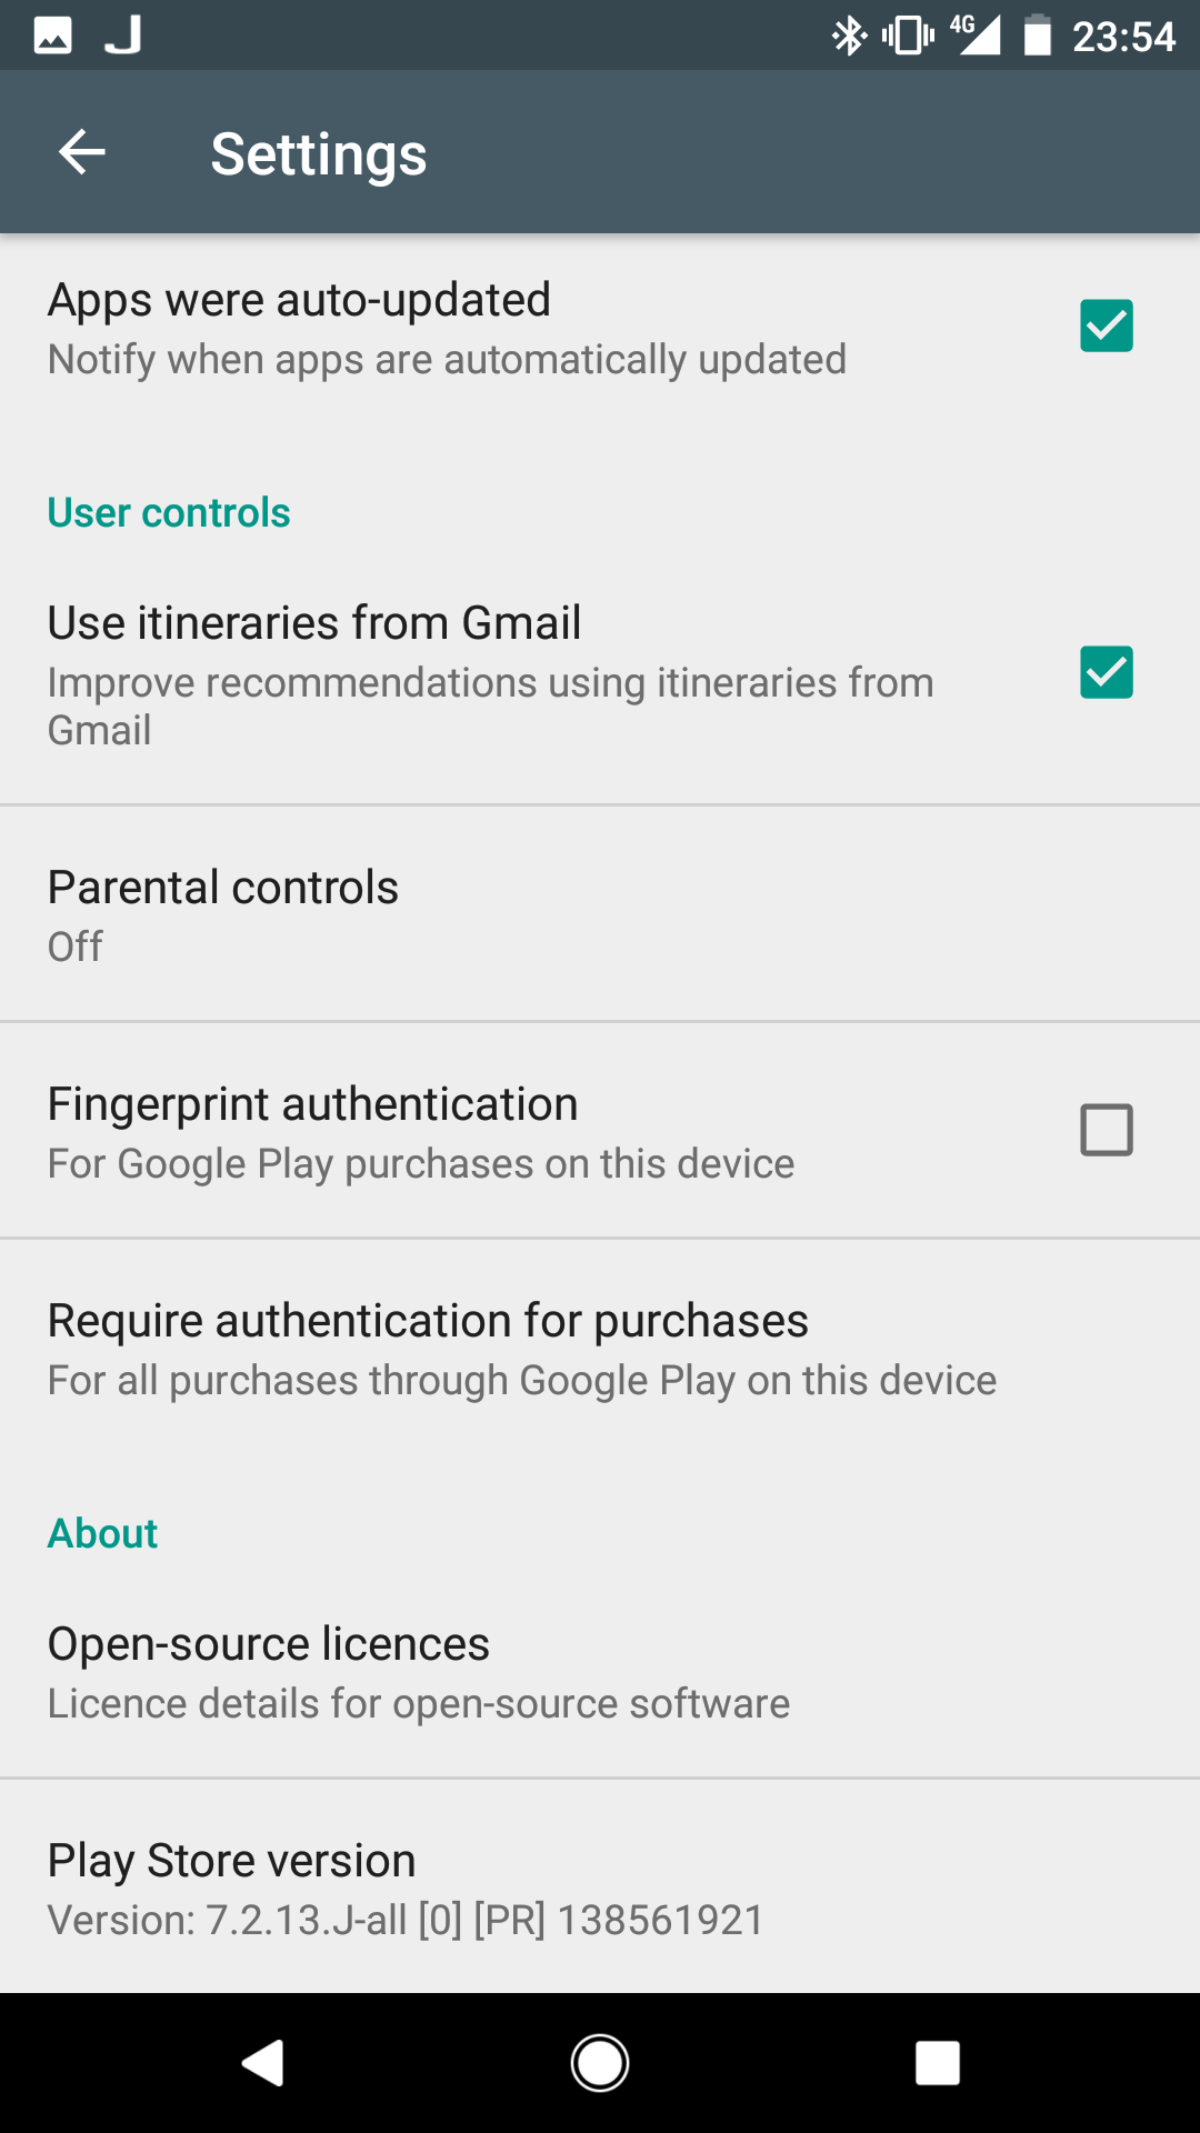 google play services apk download for android 4.0.4